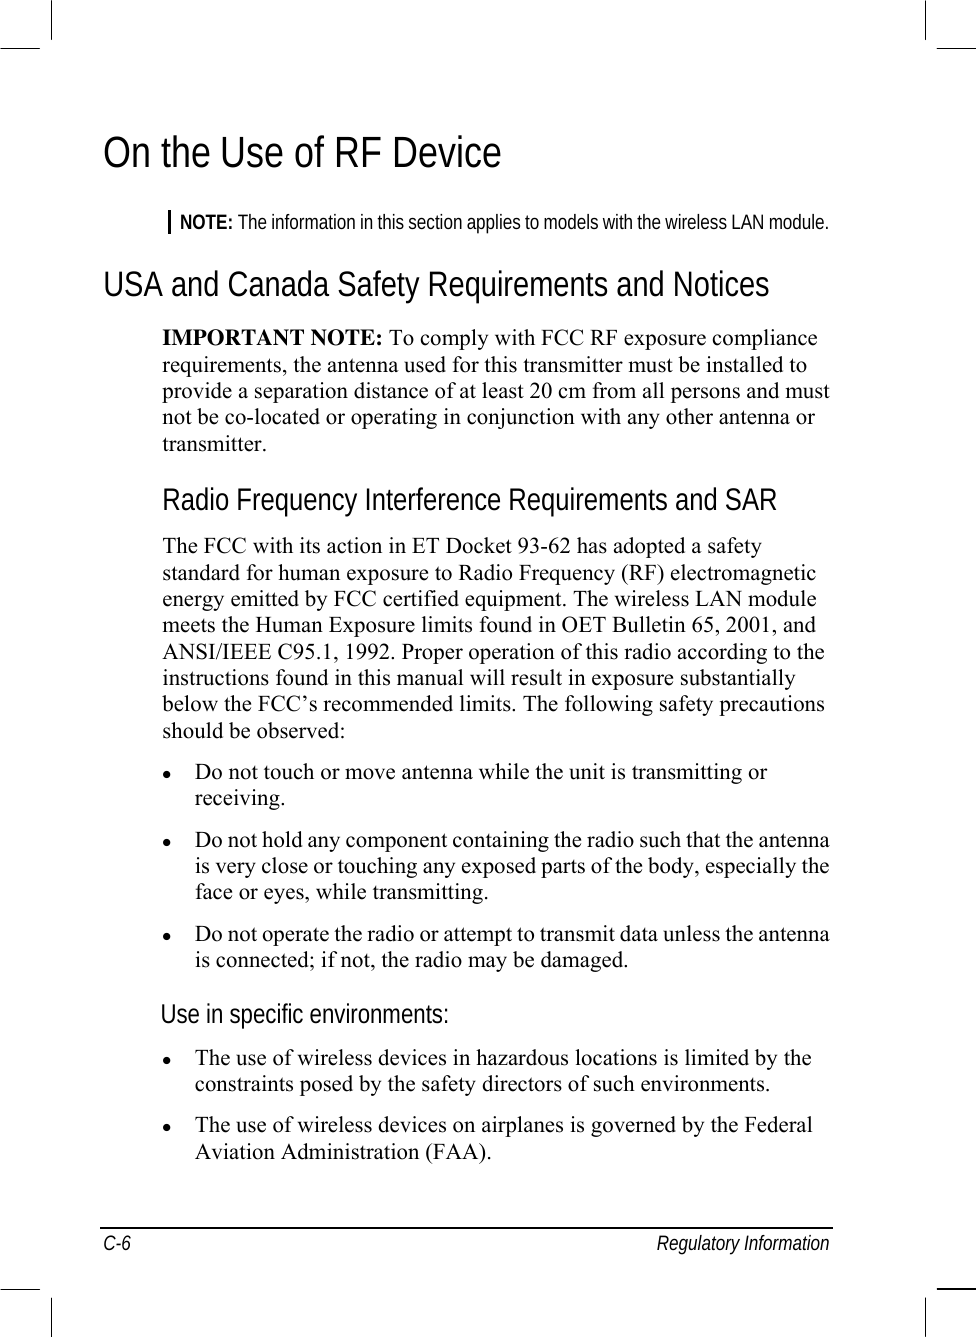  C-6 Regulatory Information On the Use of RF Device NOTE: The information in this section applies to models with the wireless LAN module. USA and Canada Safety Requirements and Notices IMPORTANT NOTE: To comply with FCC RF exposure compliance requirements, the antenna used for this transmitter must be installed to provide a separation distance of at least 20 cm from all persons and must not be co-located or operating in conjunction with any other antenna or transmitter. Radio Frequency Interference Requirements and SAR The FCC with its action in ET Docket 93-62 has adopted a safety standard for human exposure to Radio Frequency (RF) electromagnetic energy emitted by FCC certified equipment. The wireless LAN module meets the Human Exposure limits found in OET Bulletin 65, 2001, and ANSI/IEEE C95.1, 1992. Proper operation of this radio according to the instructions found in this manual will result in exposure substantially below the FCC’s recommended limits. The following safety precautions should be observed:   Do not touch or move antenna while the unit is transmitting or receiving.   Do not hold any component containing the radio such that the antenna is very close or touching any exposed parts of the body, especially the face or eyes, while transmitting.   Do not operate the radio or attempt to transmit data unless the antenna is connected; if not, the radio may be damaged. Use in specific environments:   The use of wireless devices in hazardous locations is limited by the constraints posed by the safety directors of such environments.   The use of wireless devices on airplanes is governed by the Federal Aviation Administration (FAA). 